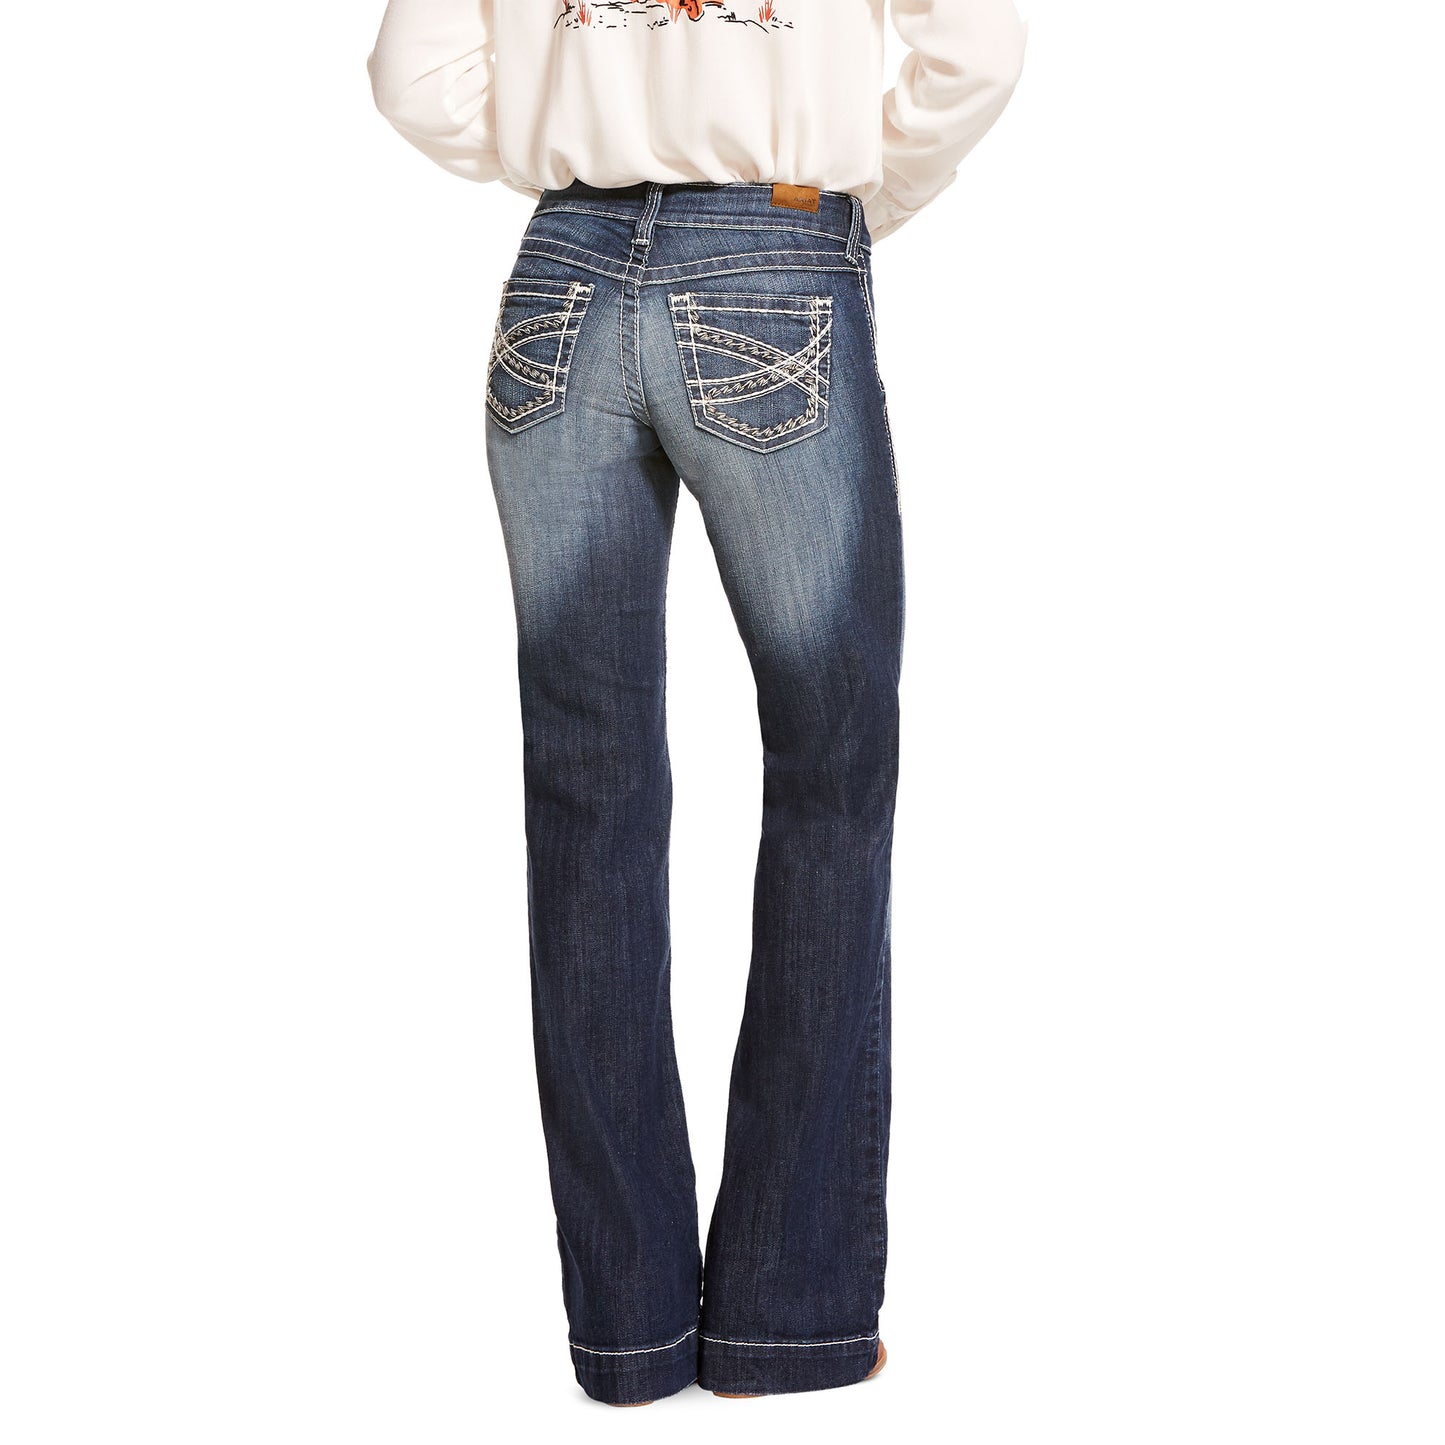 Women's Ariat Entwined Marine Trouser Jeans